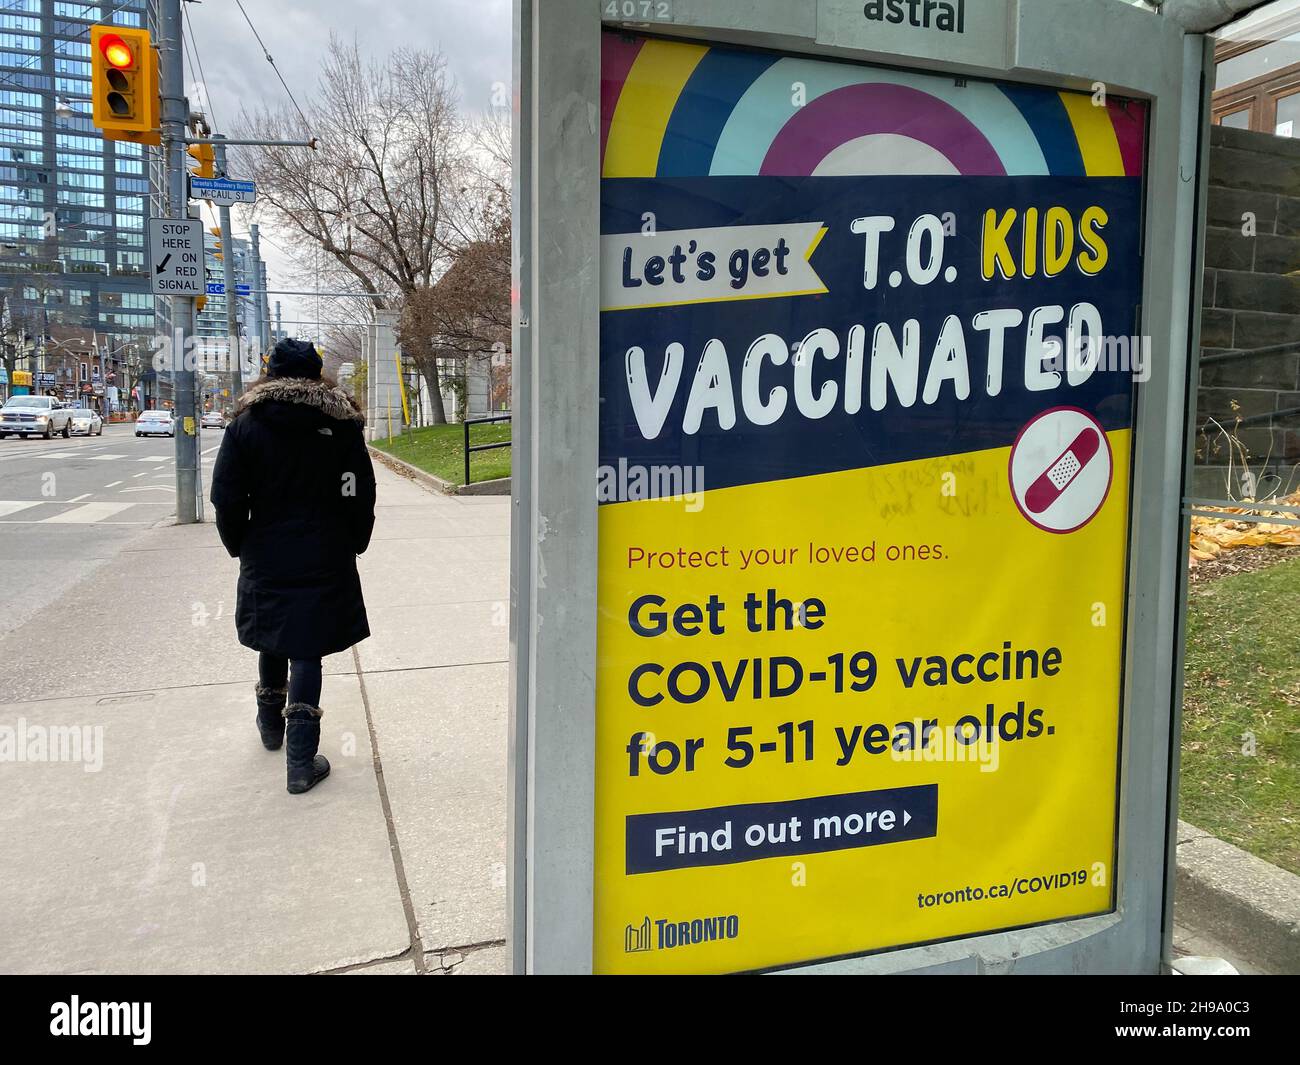 SIGNAGE IN BUS SHELTER PROMOTING COVID-19 VACCINATION FOR CHILDREN AGE 5 TO 11 YEARS OLD. Stock Photo